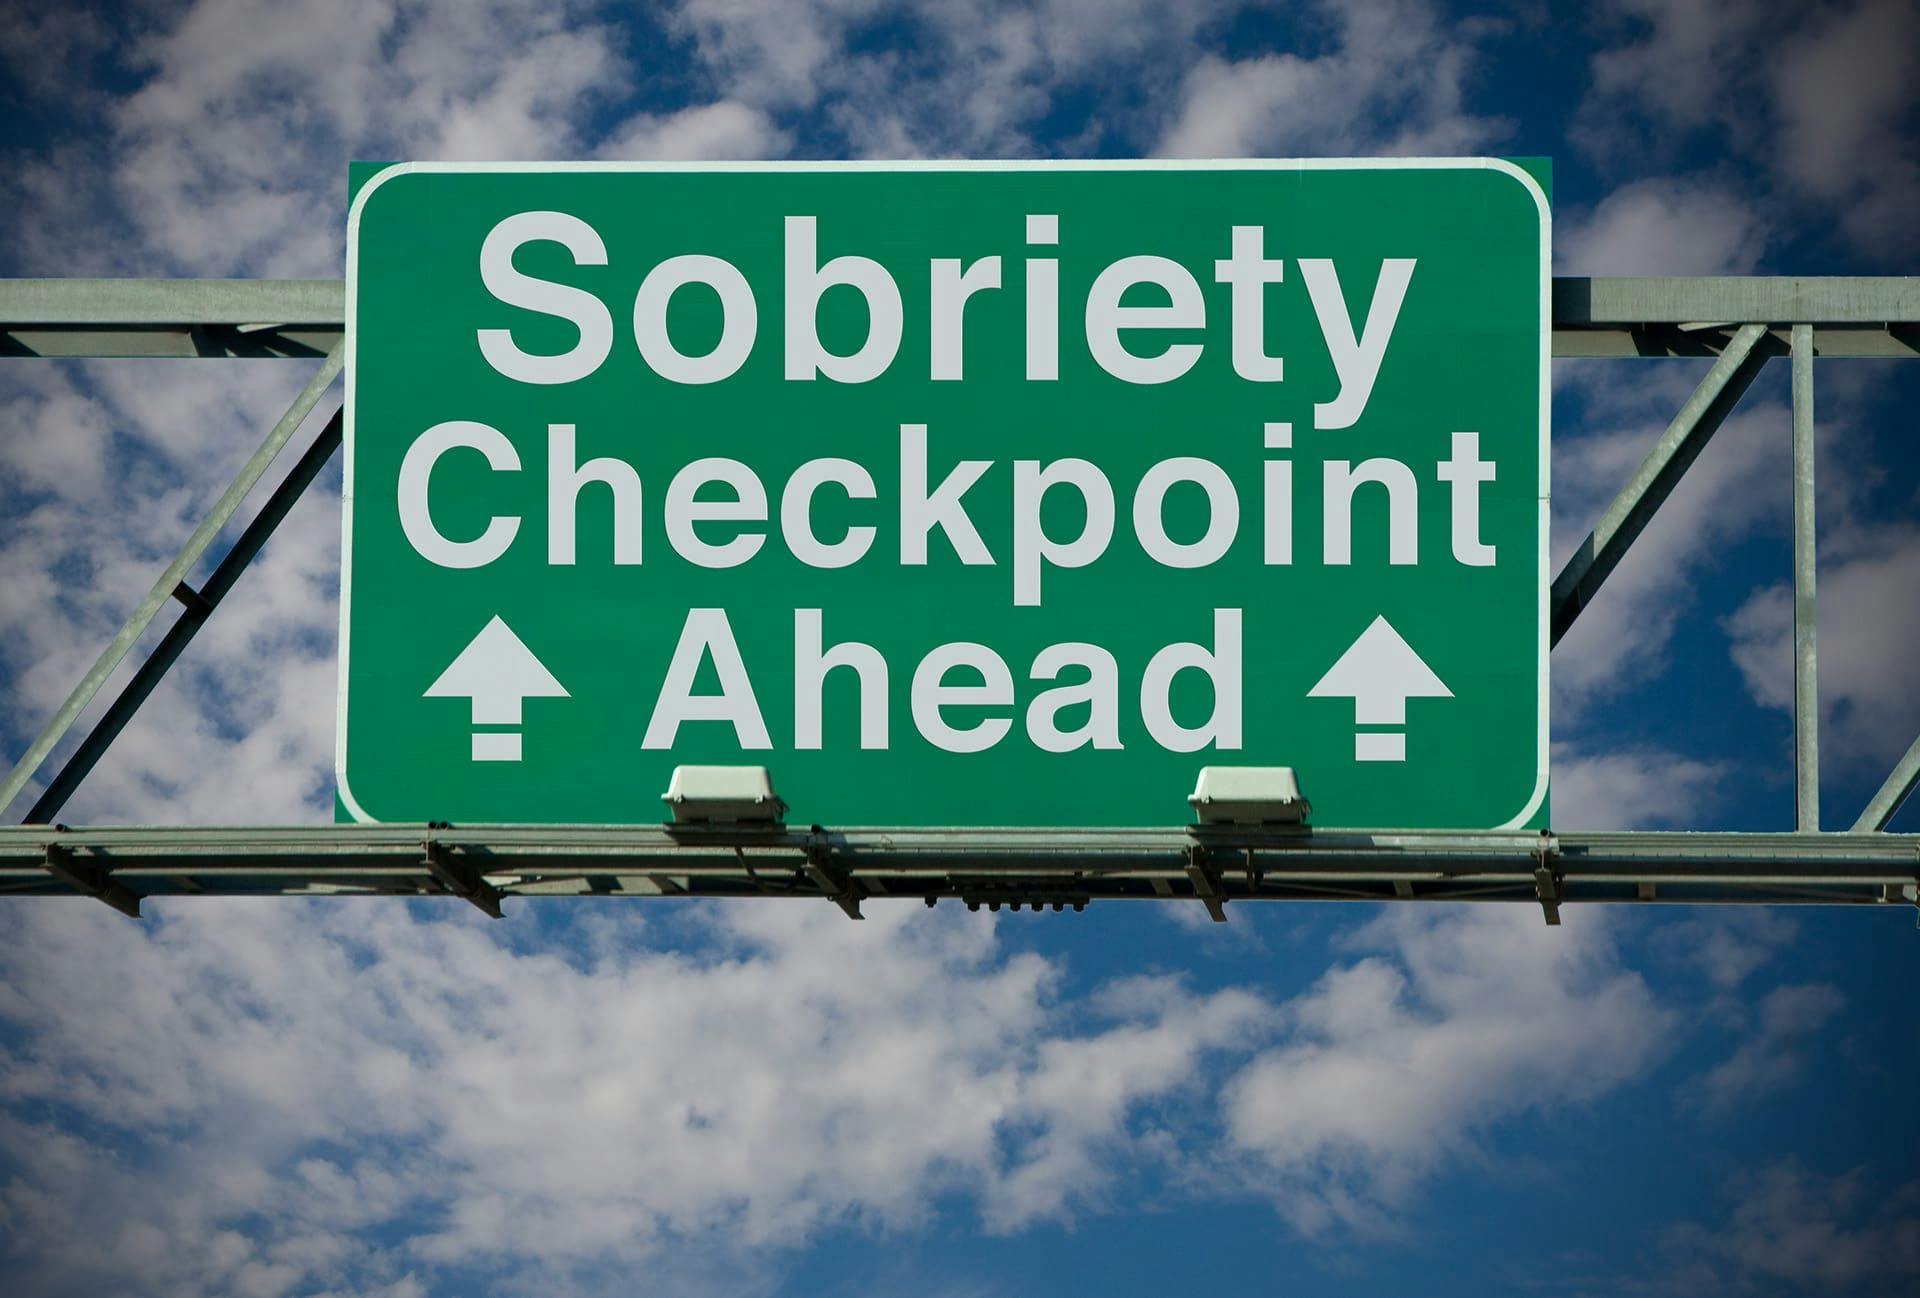 Sobriety checkpoint ahead highway sign